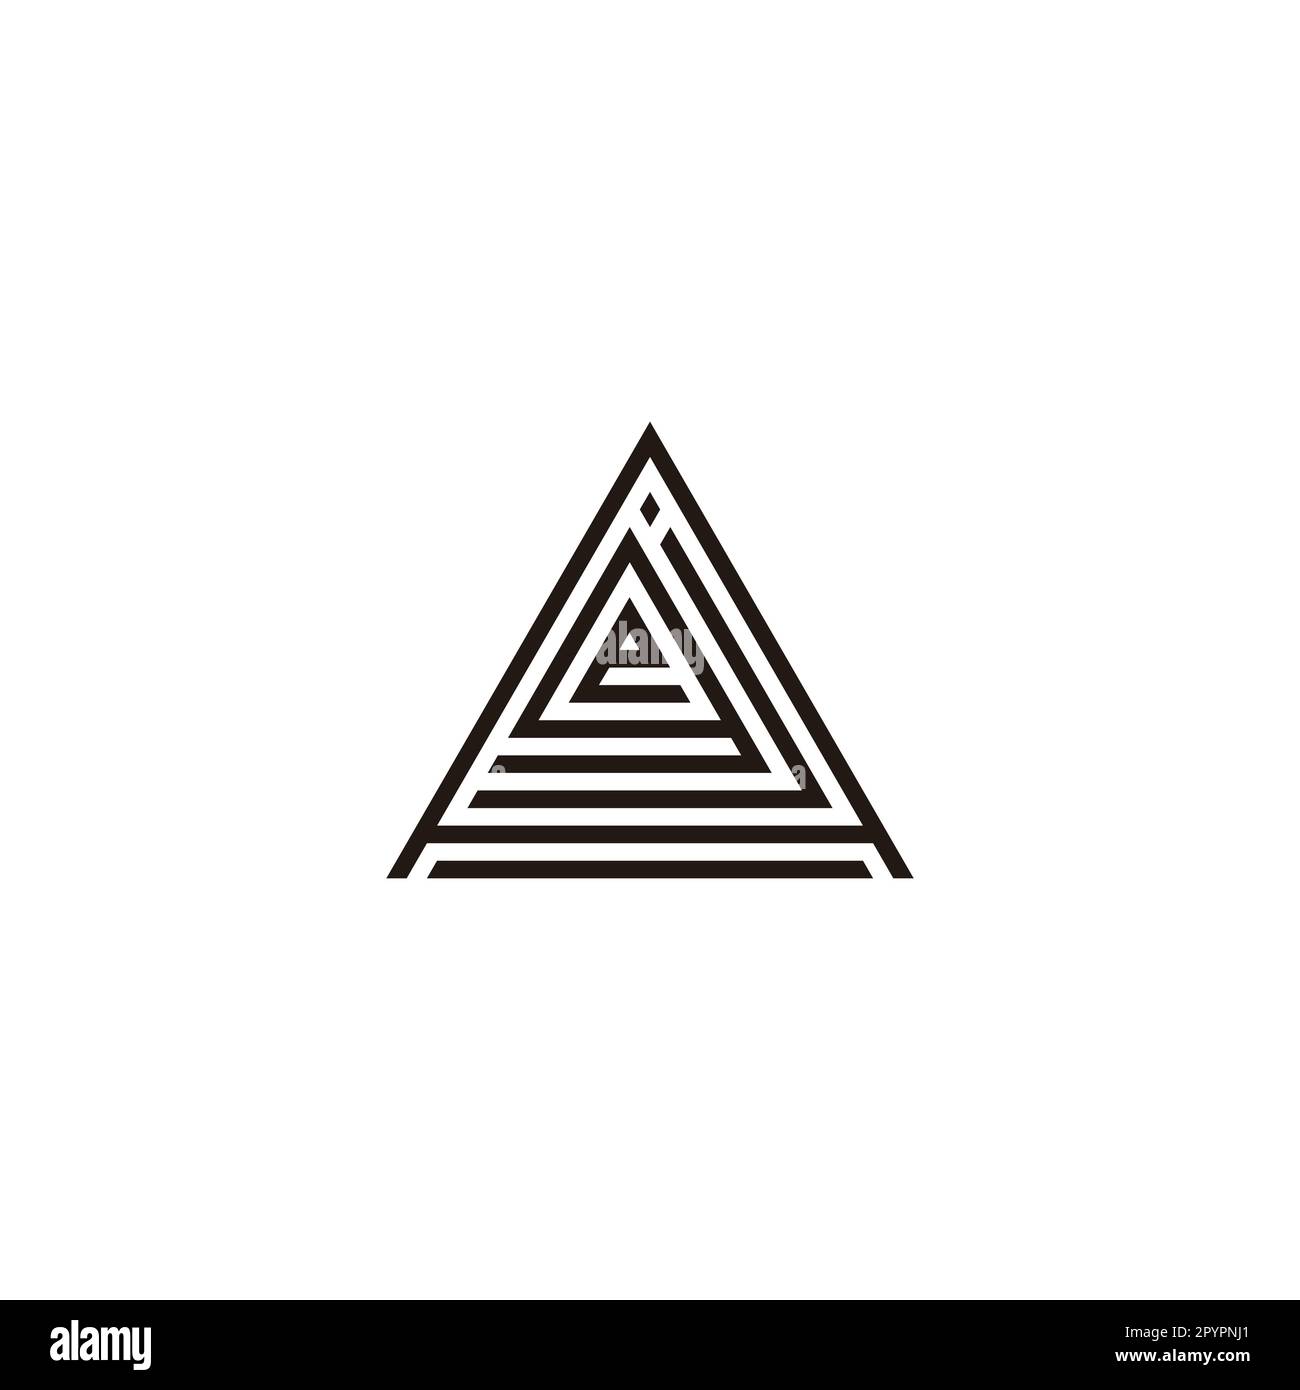 Letter A, j, g and e triangle line geometric symbol simple logo vector Stock Vector